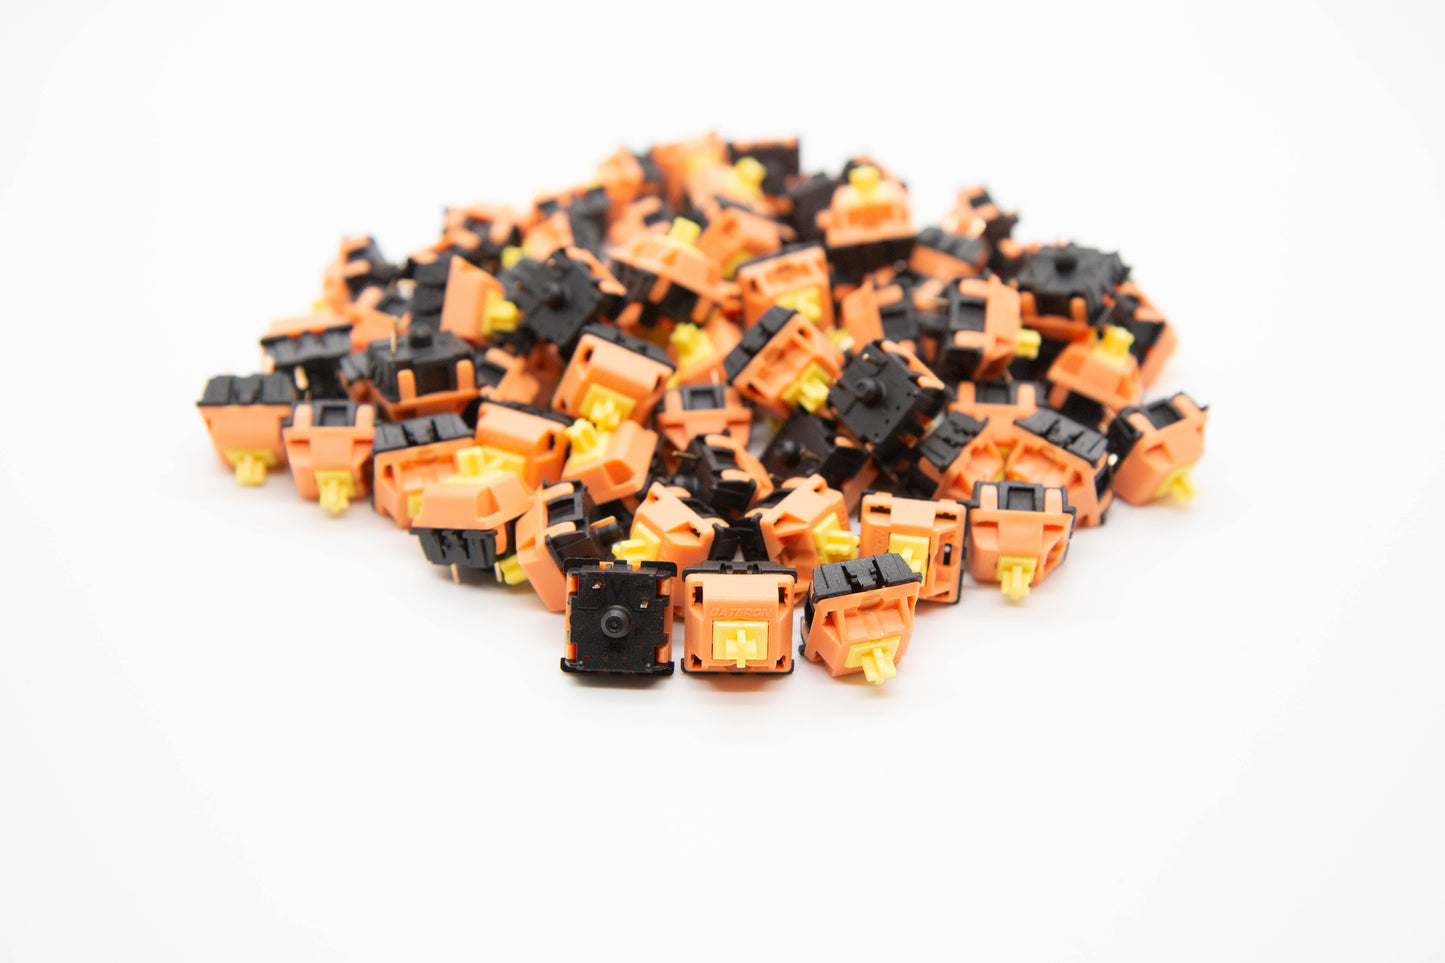 Close up shot of a pile of Silent Yellow mechanical keyboard switches featuring black/orange housing and yellow stems